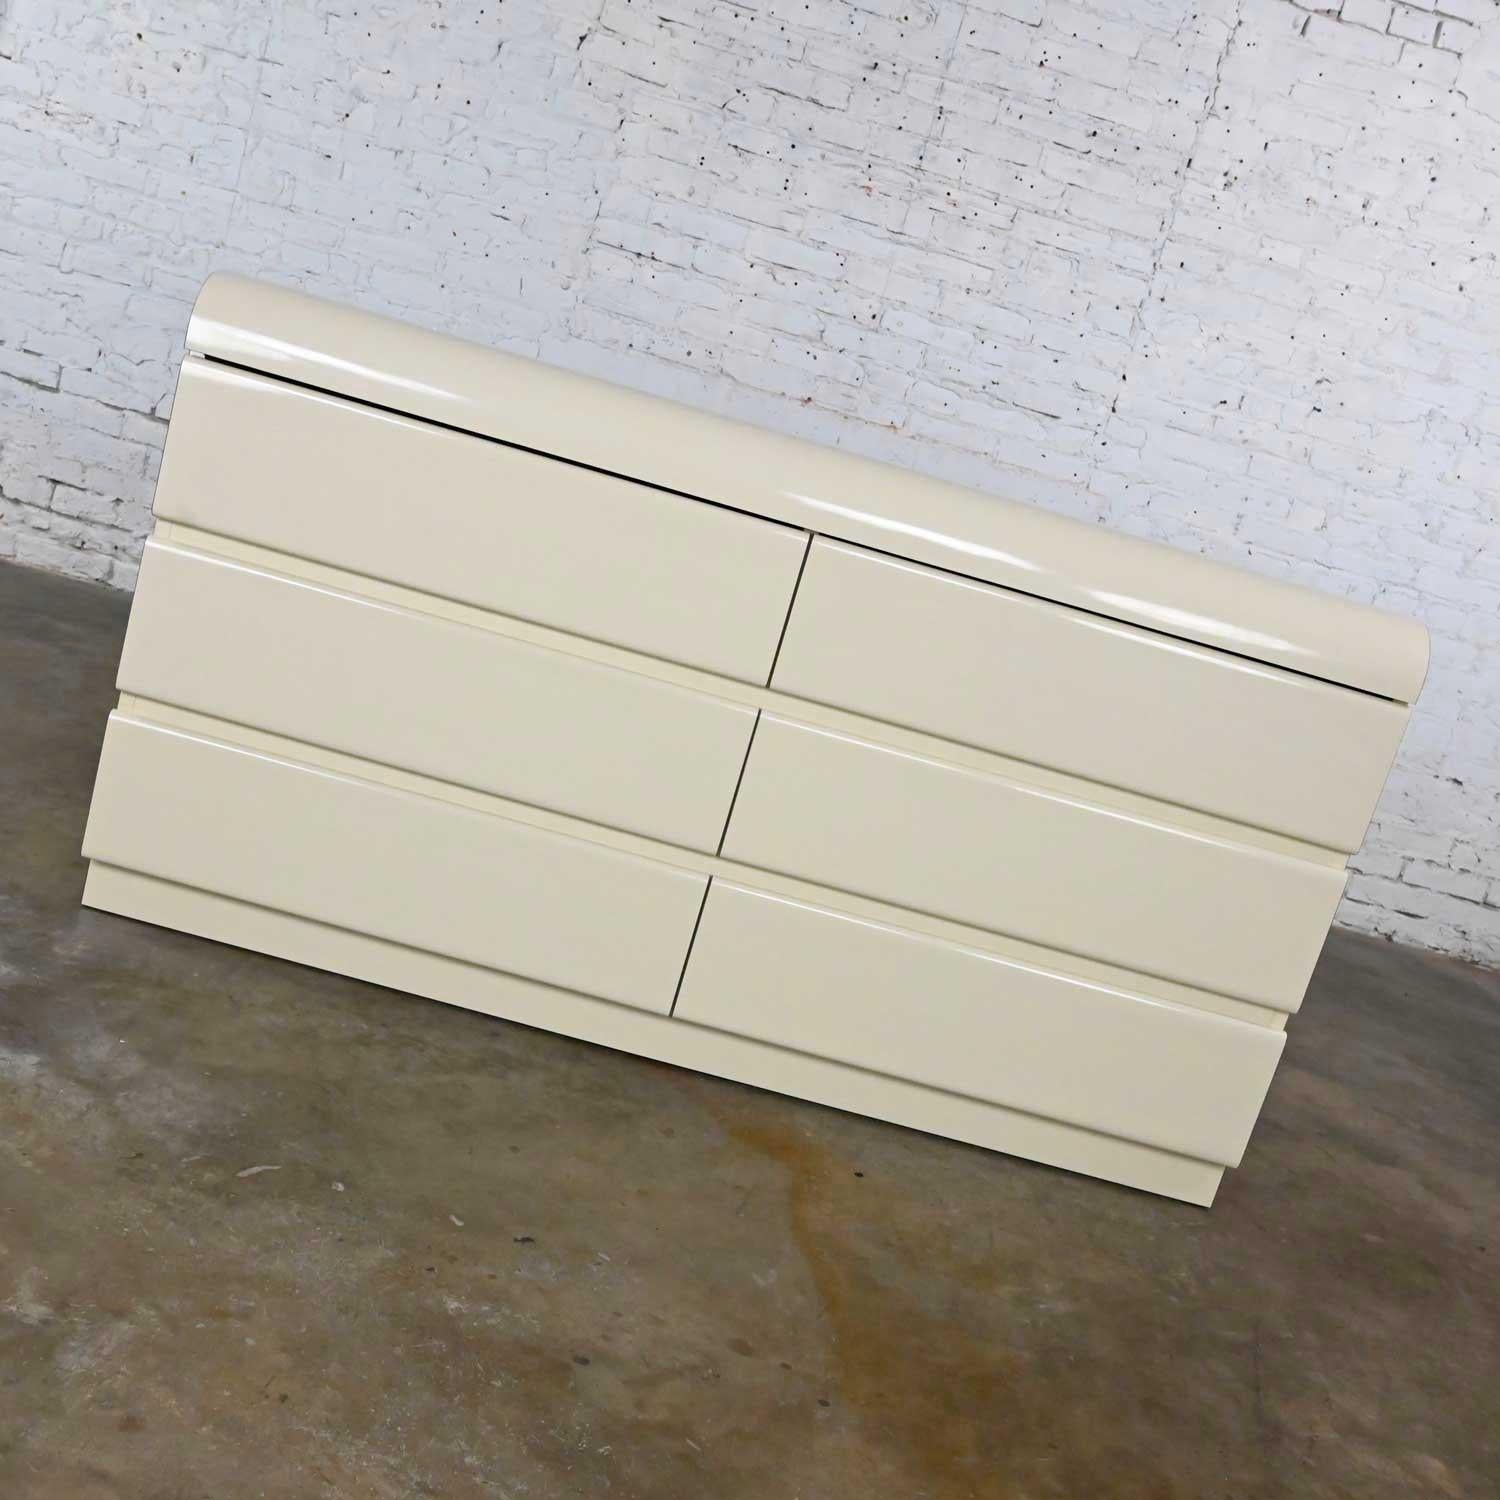 Fabulous modern to postmodern white laminate six drawer custom built dresser by Center Displays Custom Furniture and Cabinets of KCMO. Somewhat in the style of designs by both Milo Baughman and Karl Springer and even Lane. Plus, very much designed